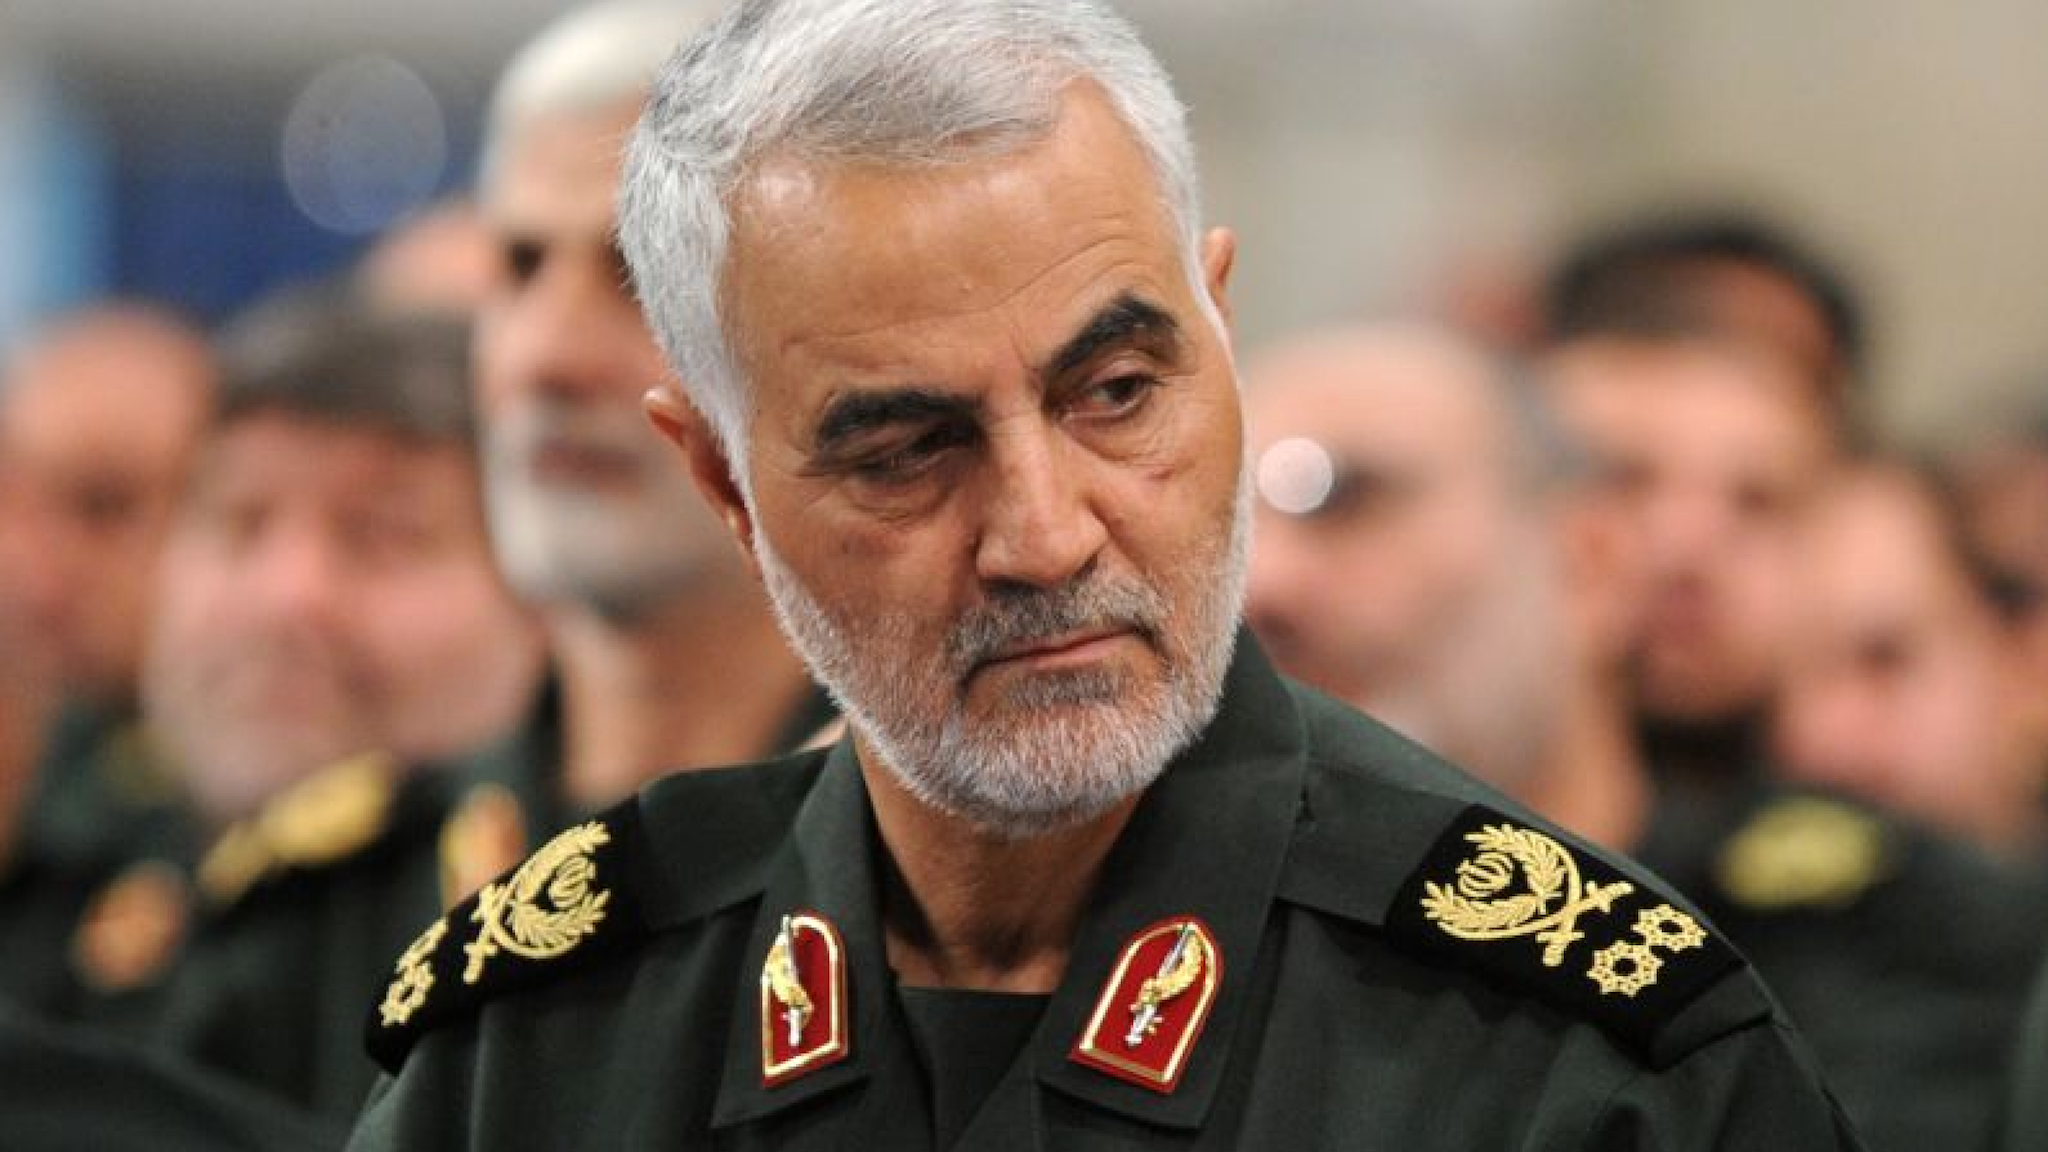 A file photo dated September 18, 2016 shows Iranian Revolutionary Guards' Quds Force commander Qasem Soleimani during Iranian Supreme Leader Ayatollah Ali Khamenei's meeting with Revolutionary Guards, in Tehran, Iran.